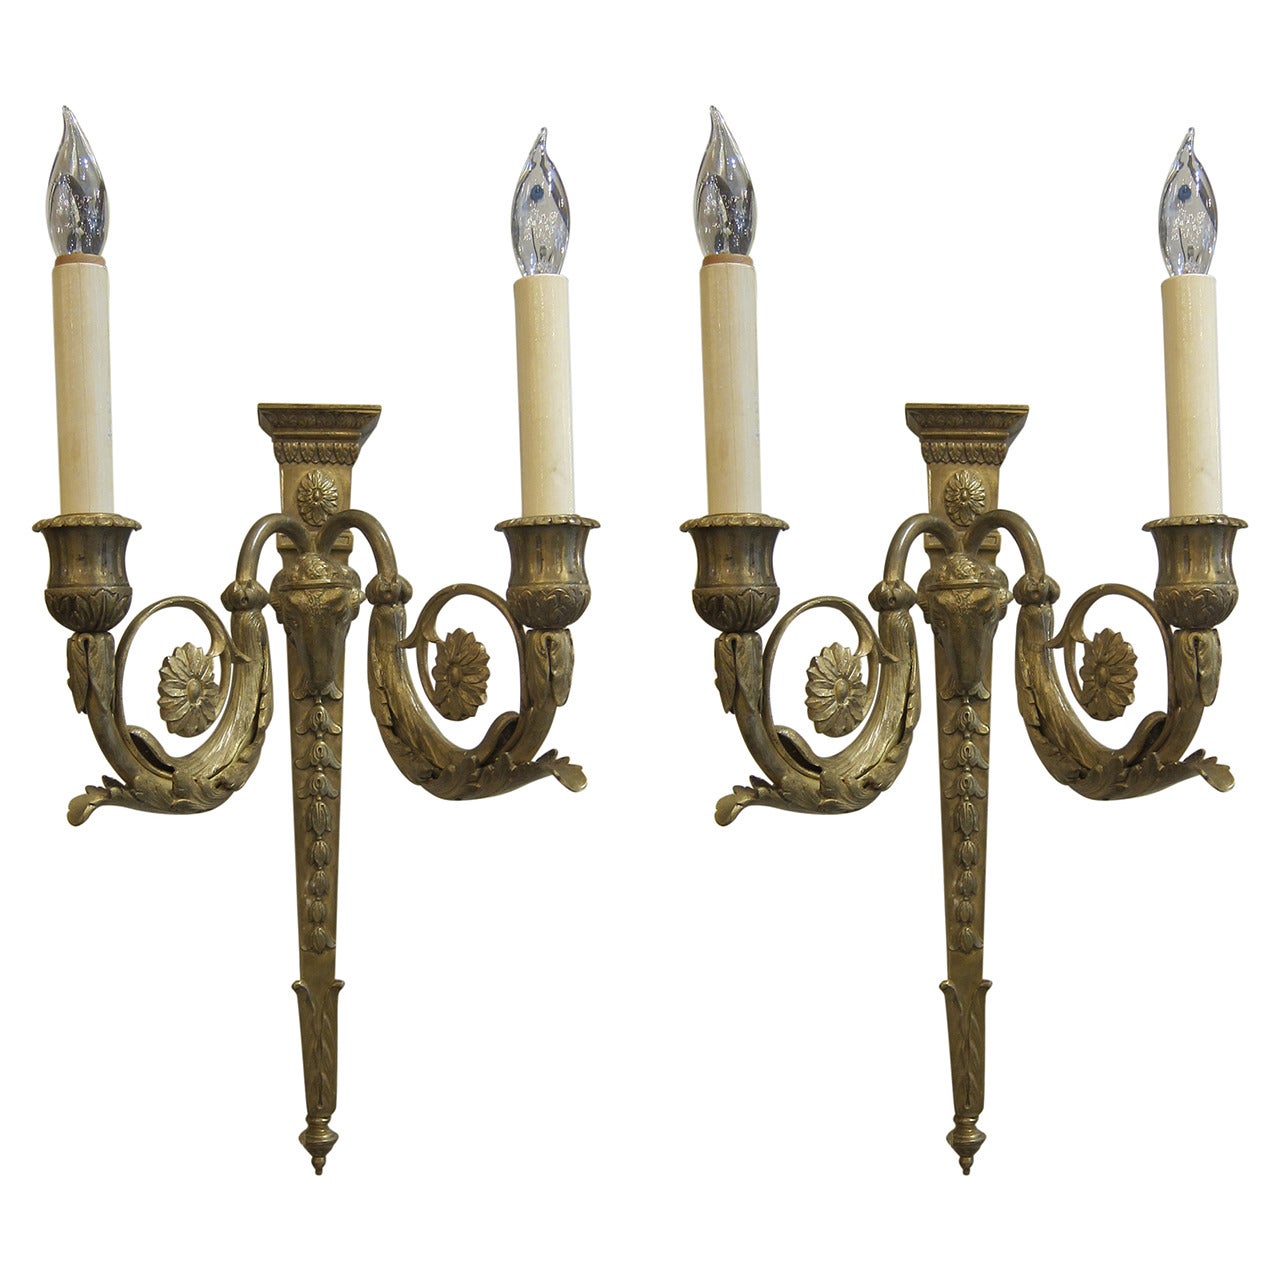 1930s Sheep Gilt Bronze Empire Sconces by E. F. Caldwell with Two Lights Each